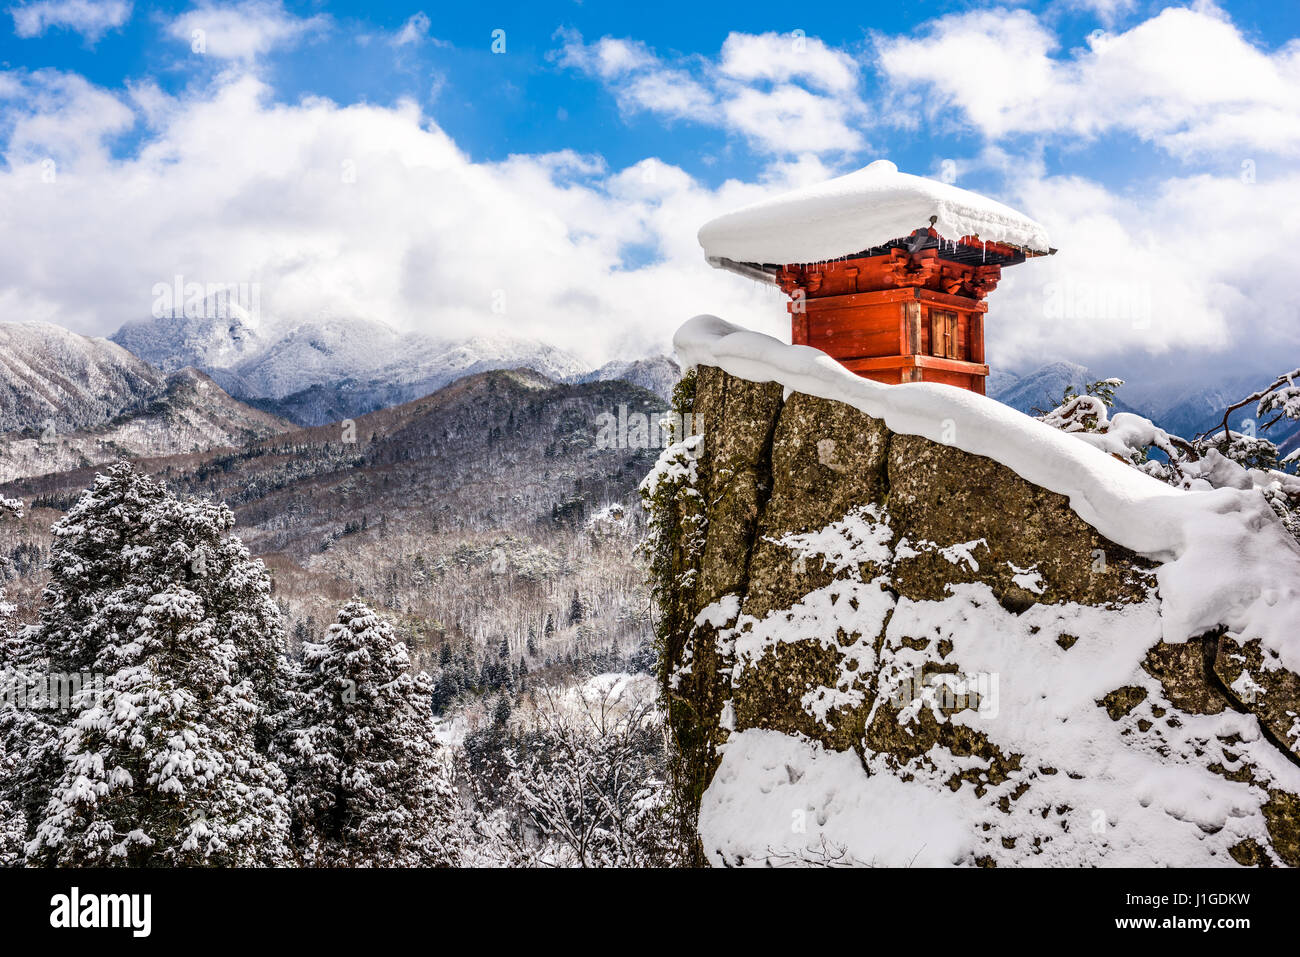 Yamadera, Japan at the Mountain Temple in winter. Stock Photo